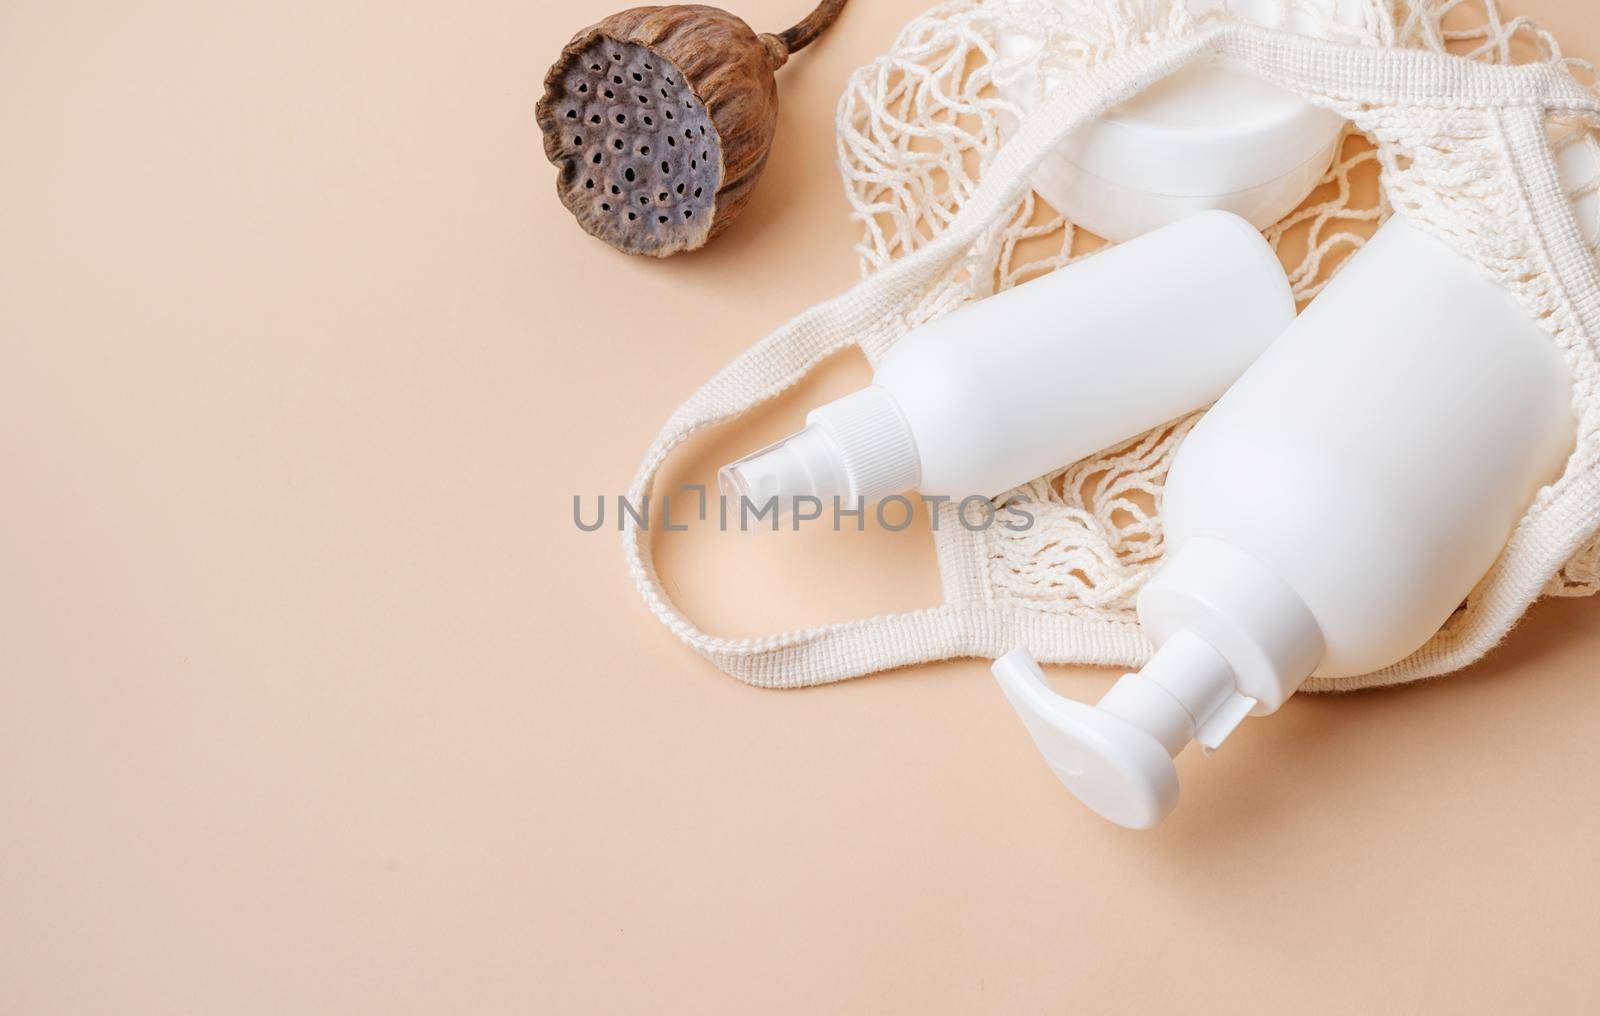 Eco friendly shopping and living. Natural skincare beauty product in mesh bag on beige backdrop. Natural earthy colors, beige background, minimal design